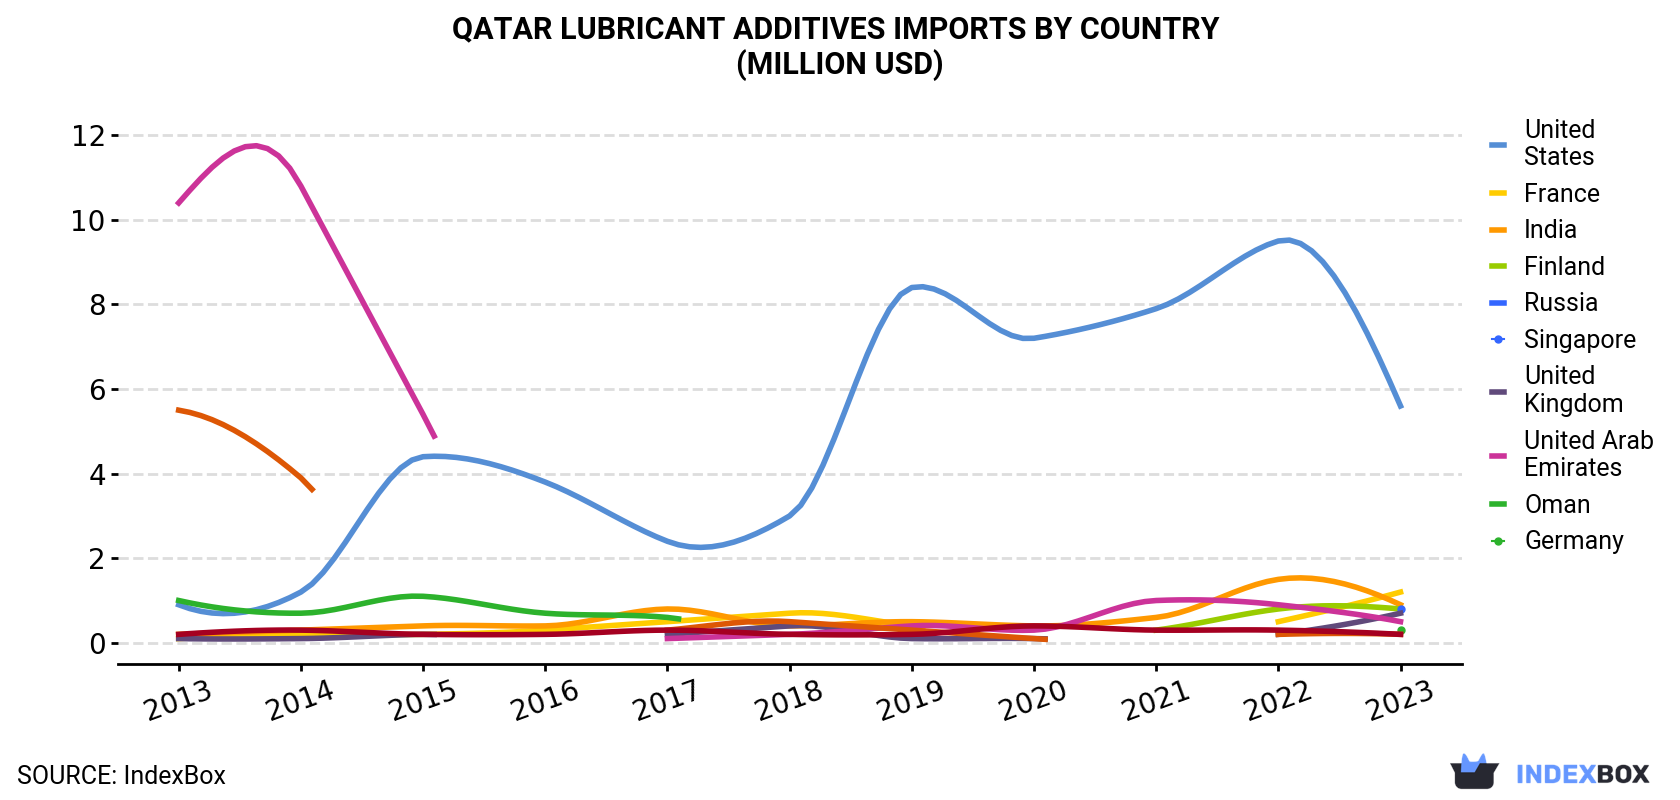 Qatar Lubricant Additives Imports By Country (Million USD)